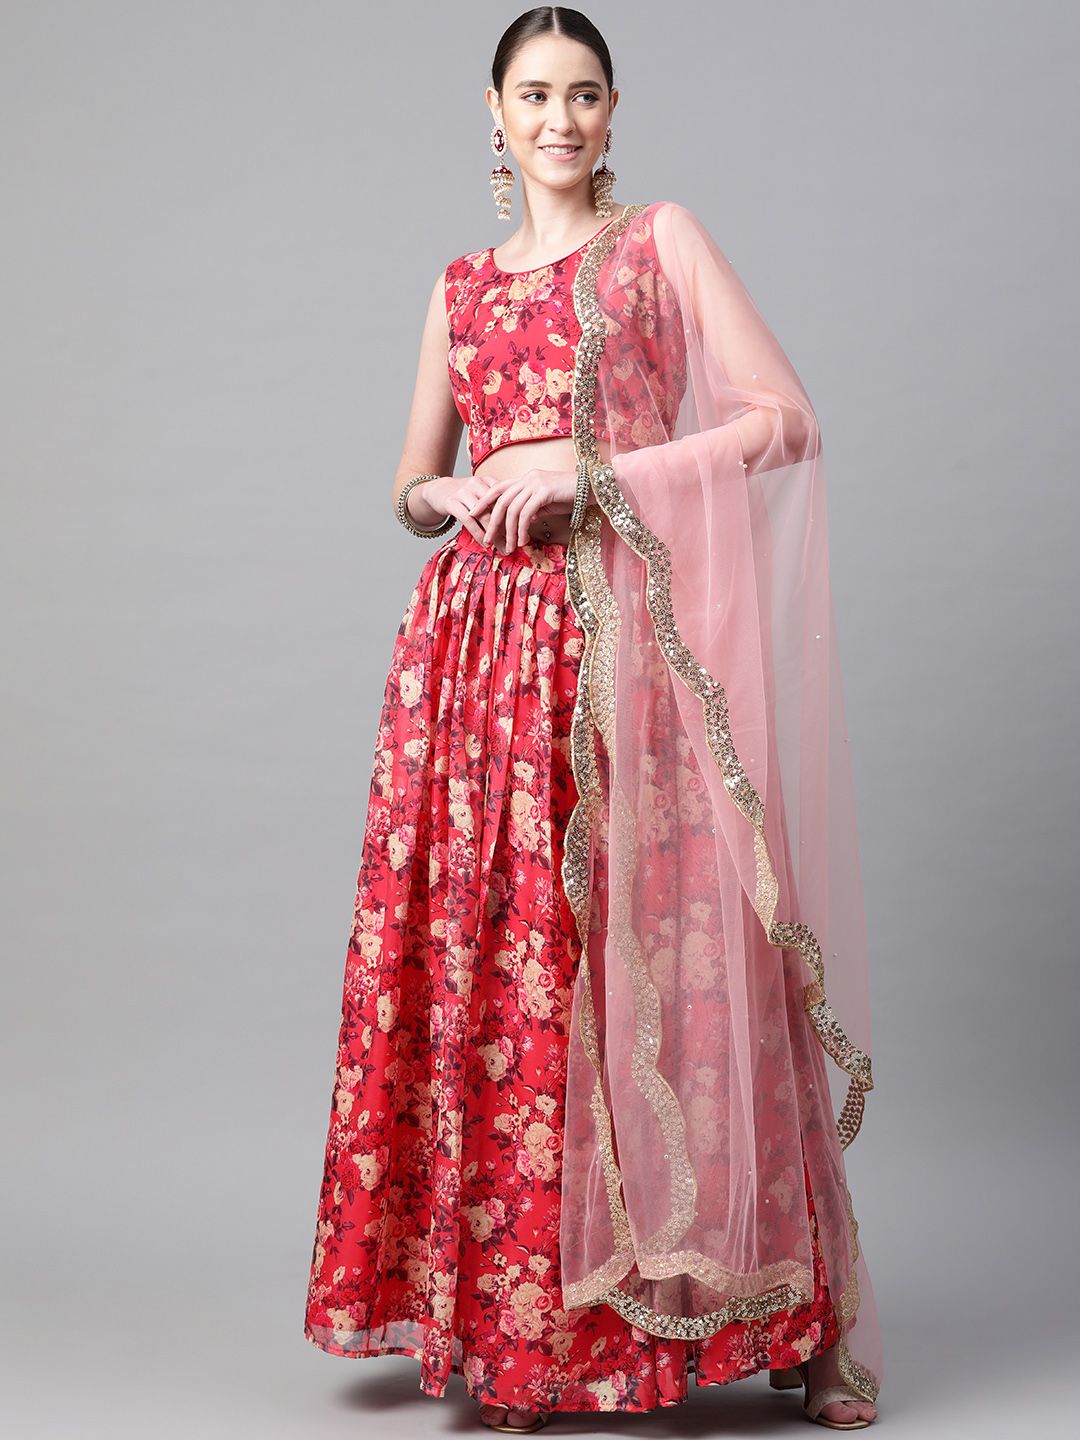 Readiprint Fashions Red & Pink Printed Semi-Stitched Lehenga & Blouse with Dupatta Price in India